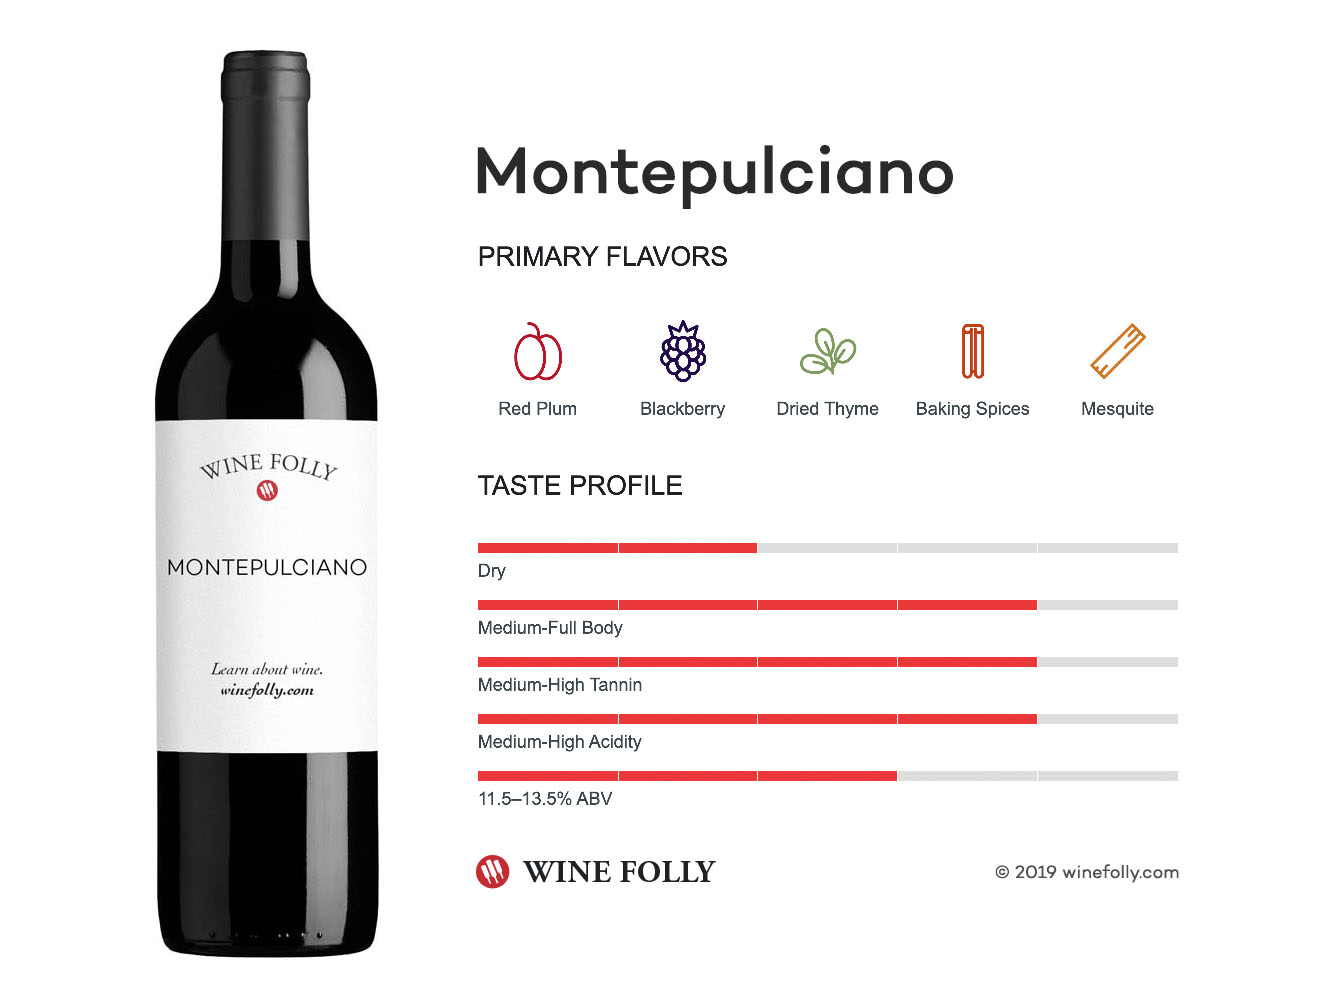 Montepulciano wine taste profile - infographic by Wine Folly